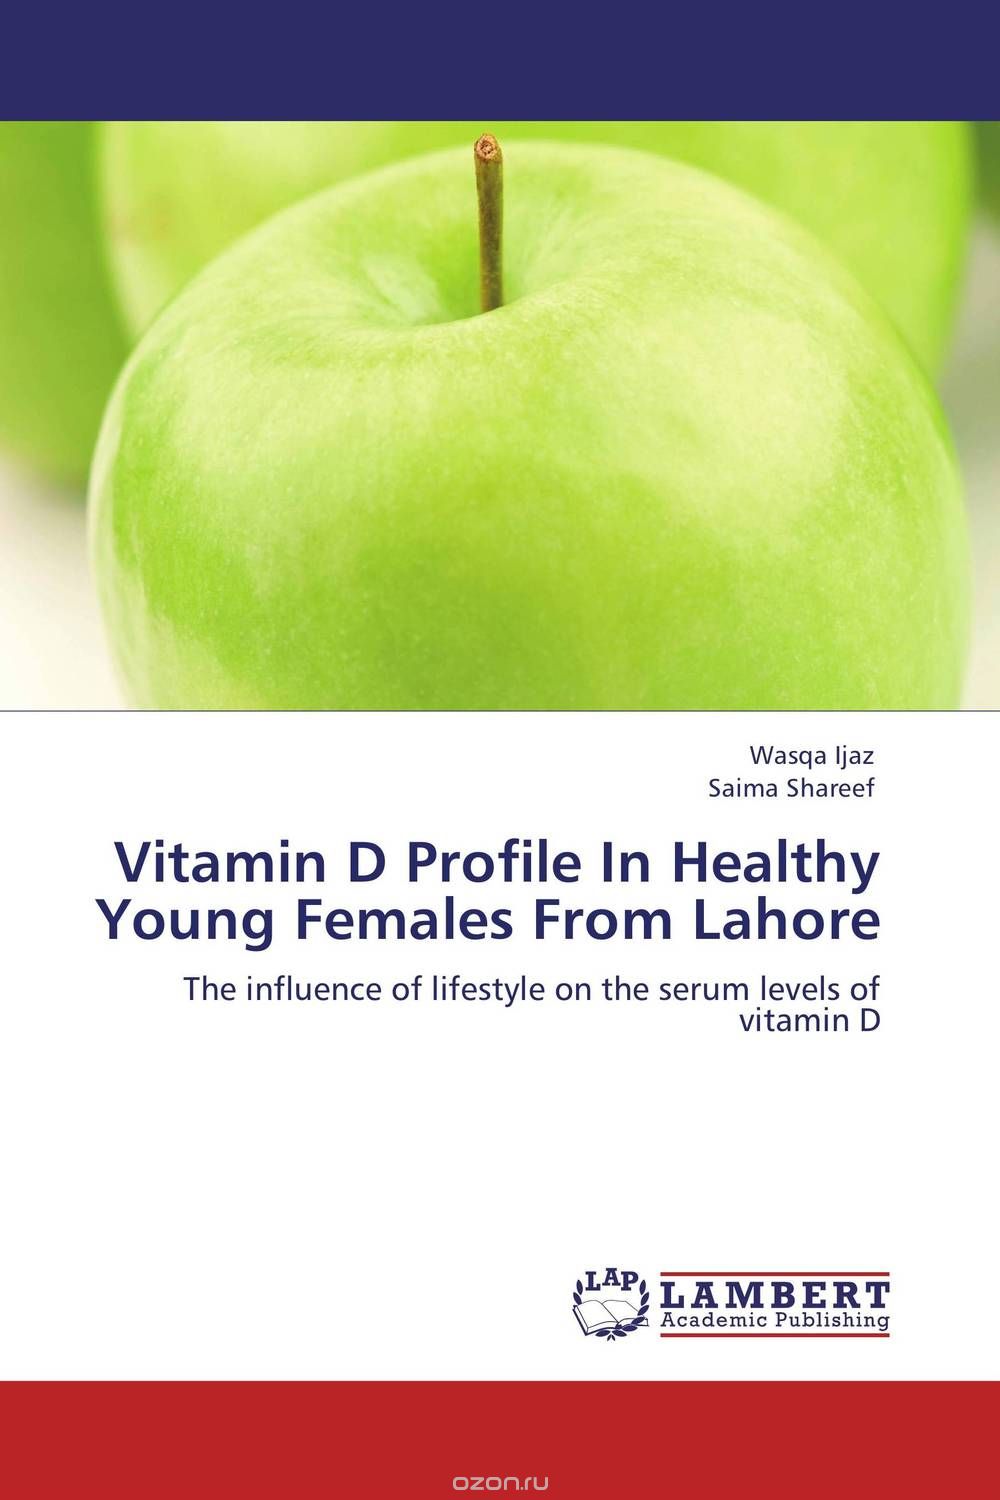 Скачать книгу "Vitamin D Profile In Healthy Young Females From Lahore"